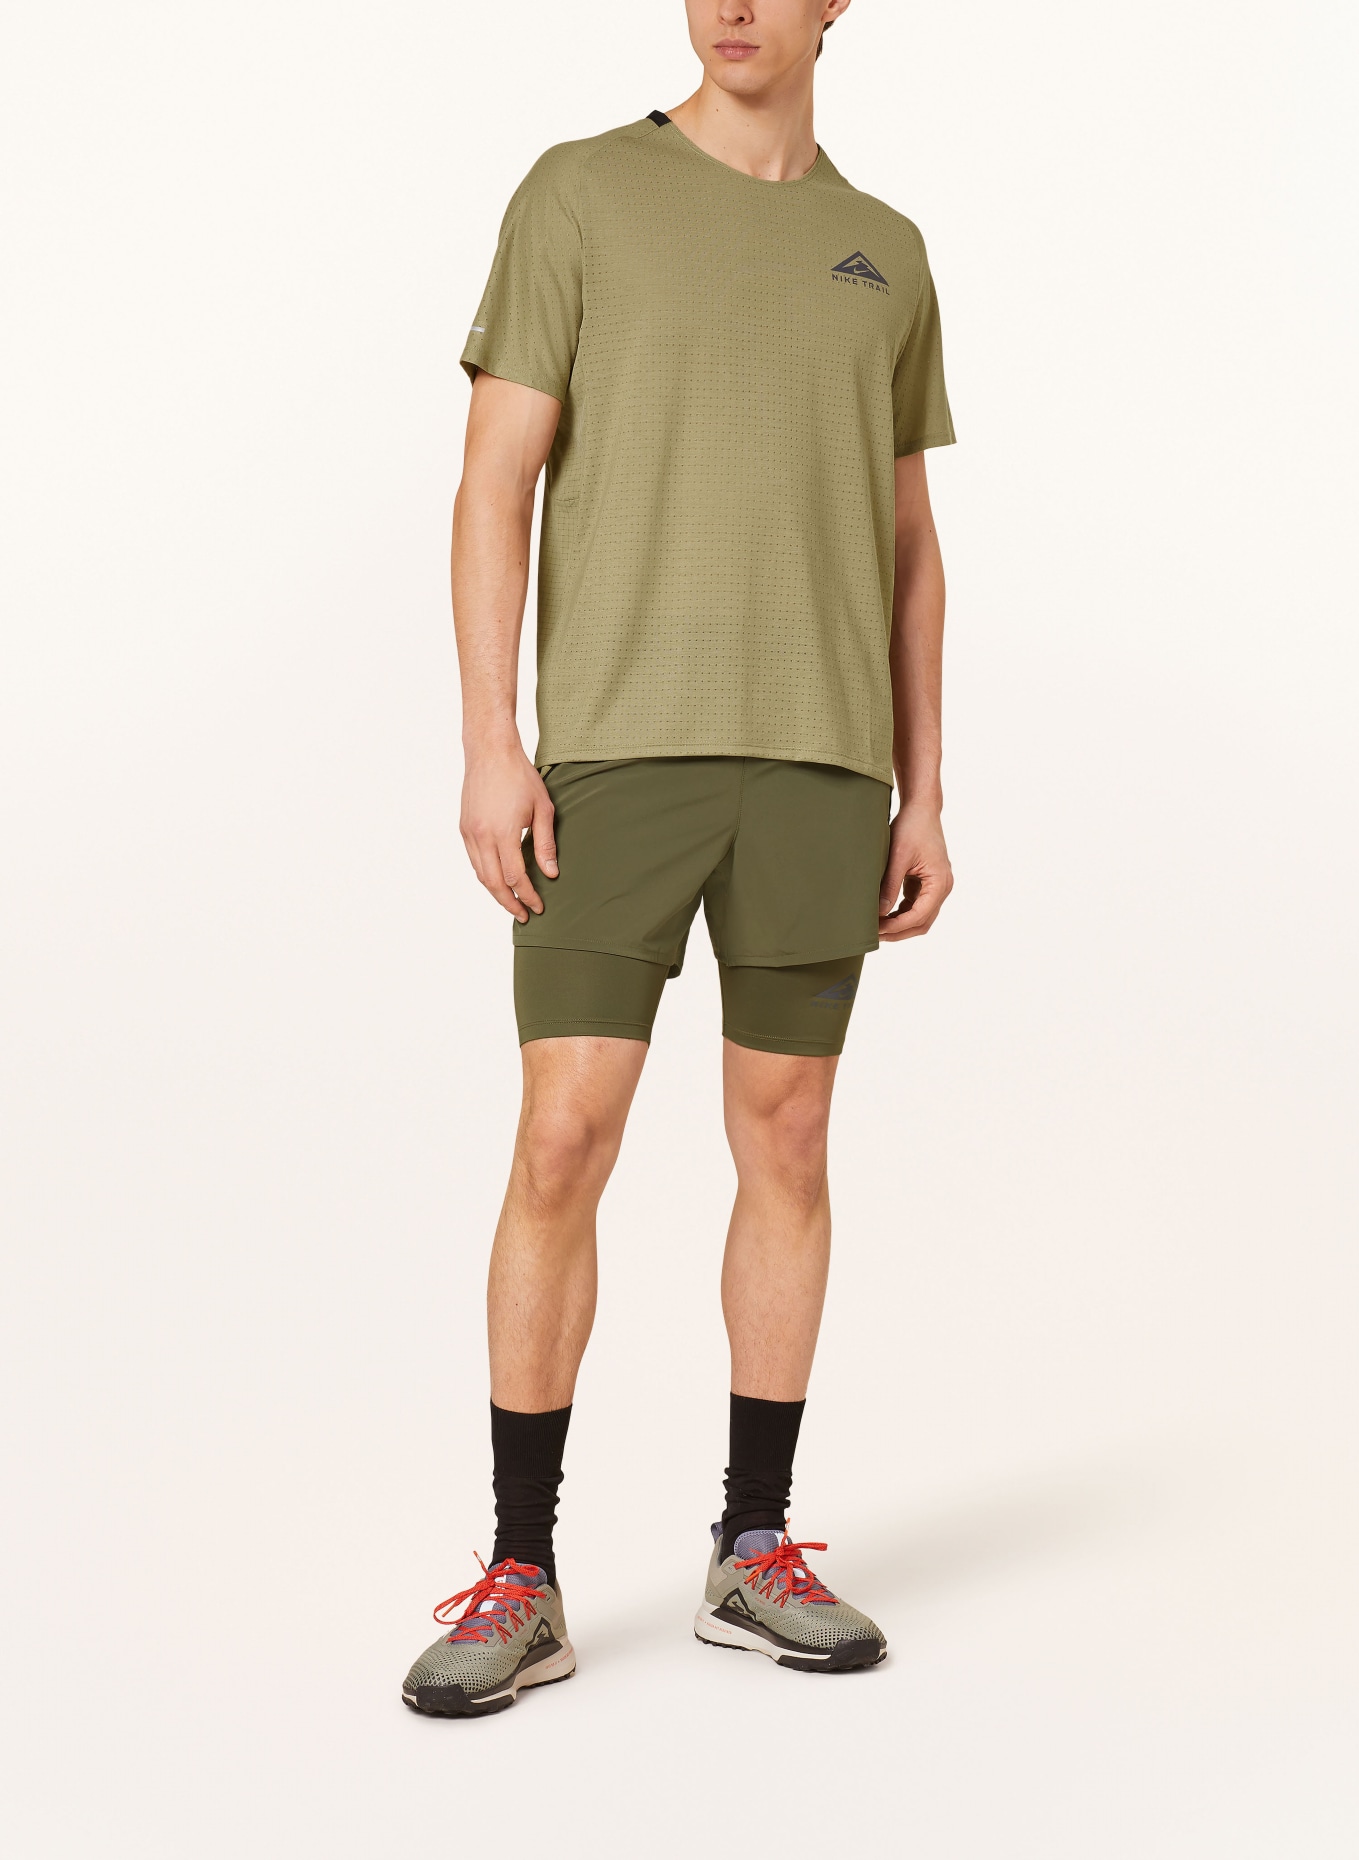 Nike Running shirt TRAIL SOLAR CHASE, Color: OLIVE (Image 2)